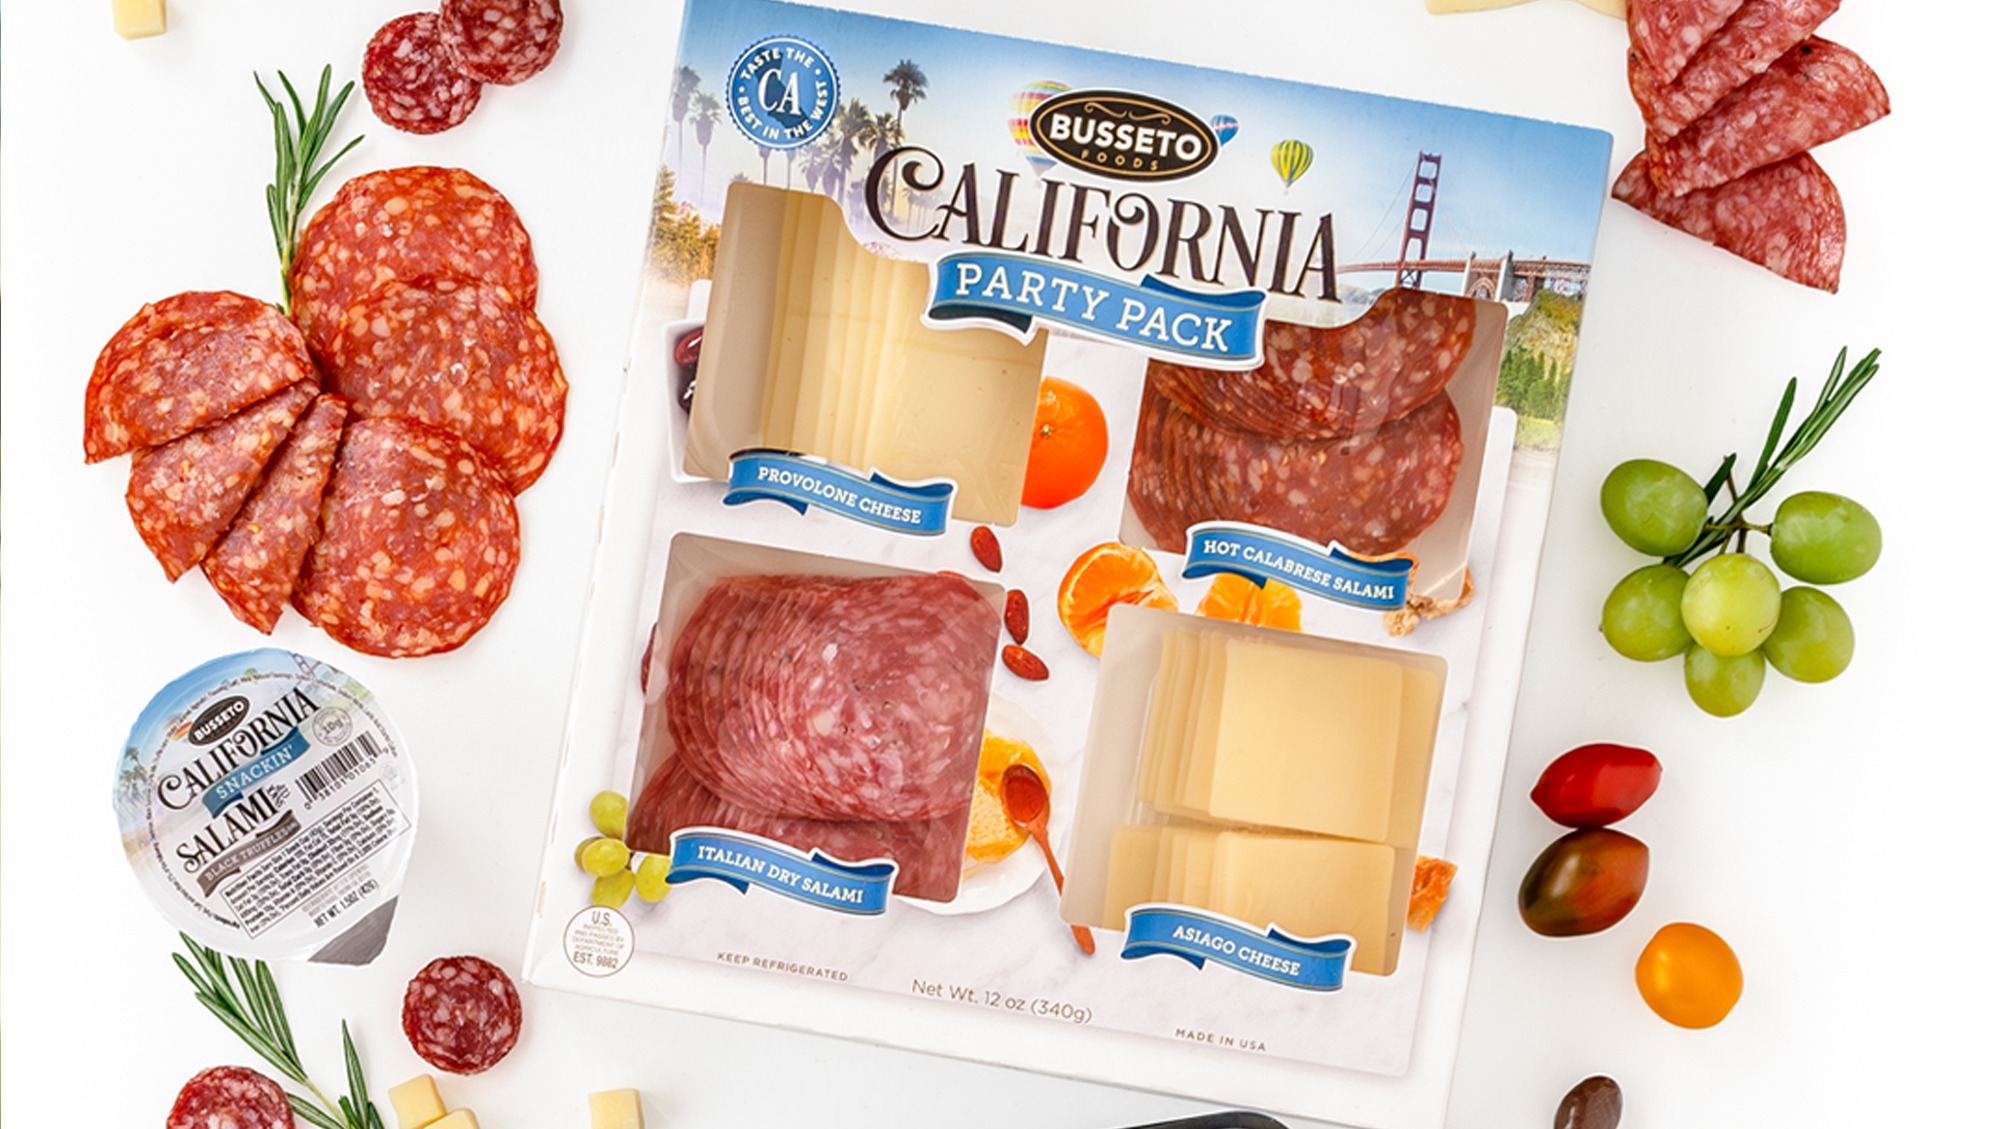 California Snackin' Package Design, Food Photography, Food Styling, by Octane Advertising Design